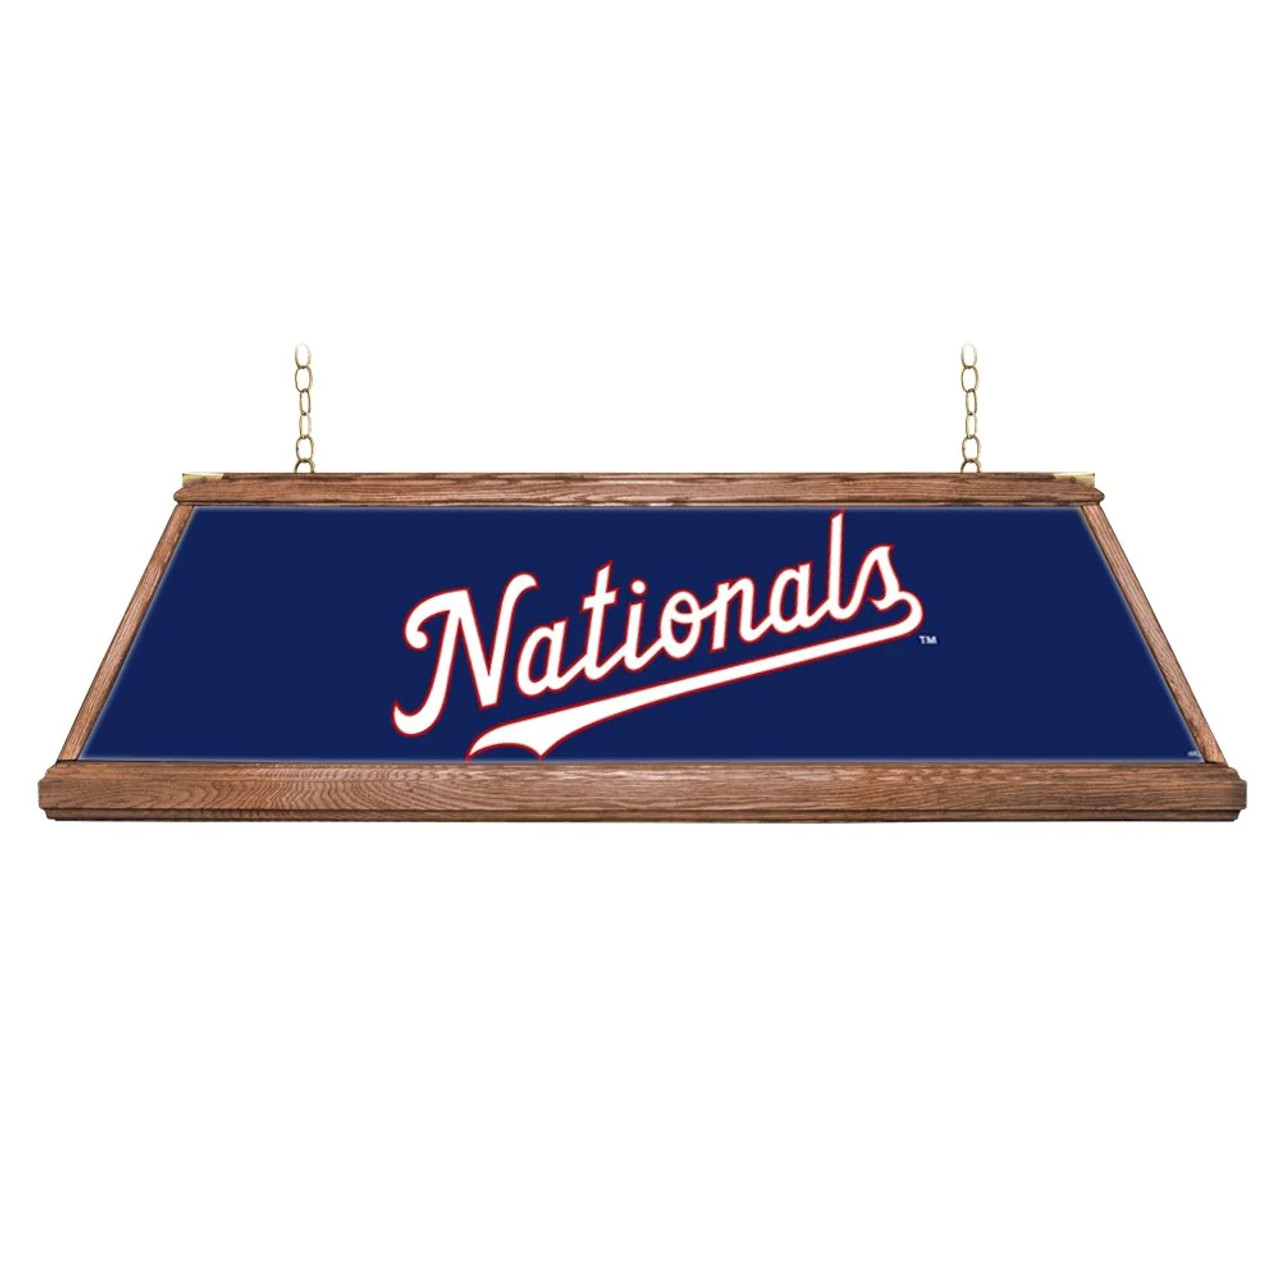 MBNATIONALS-330-01A, WAS, Washington, Nationals, Premium, Wood, Billiard, Pool, Table, Light, Lamp, MLB, The Fan-Brand, "A" Version, 704384966753